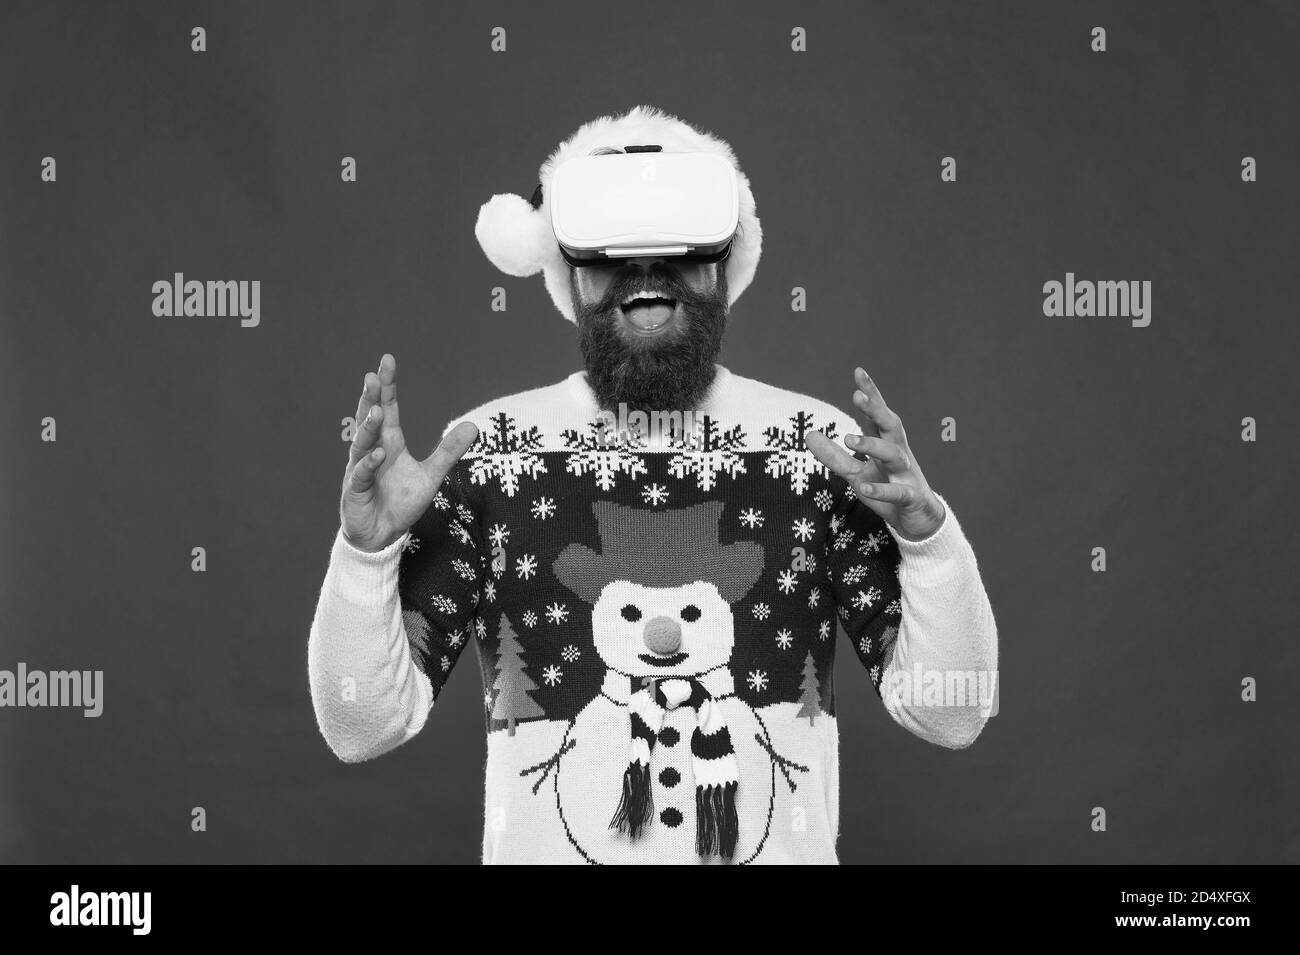 Virtual life. Man celebrate christmas virtual reality device. Gadgets review. Techno blogger. Bearded hipster play game vr. Merry christmas. Virtual achievement. Future year. Technologies development. Stock Photo